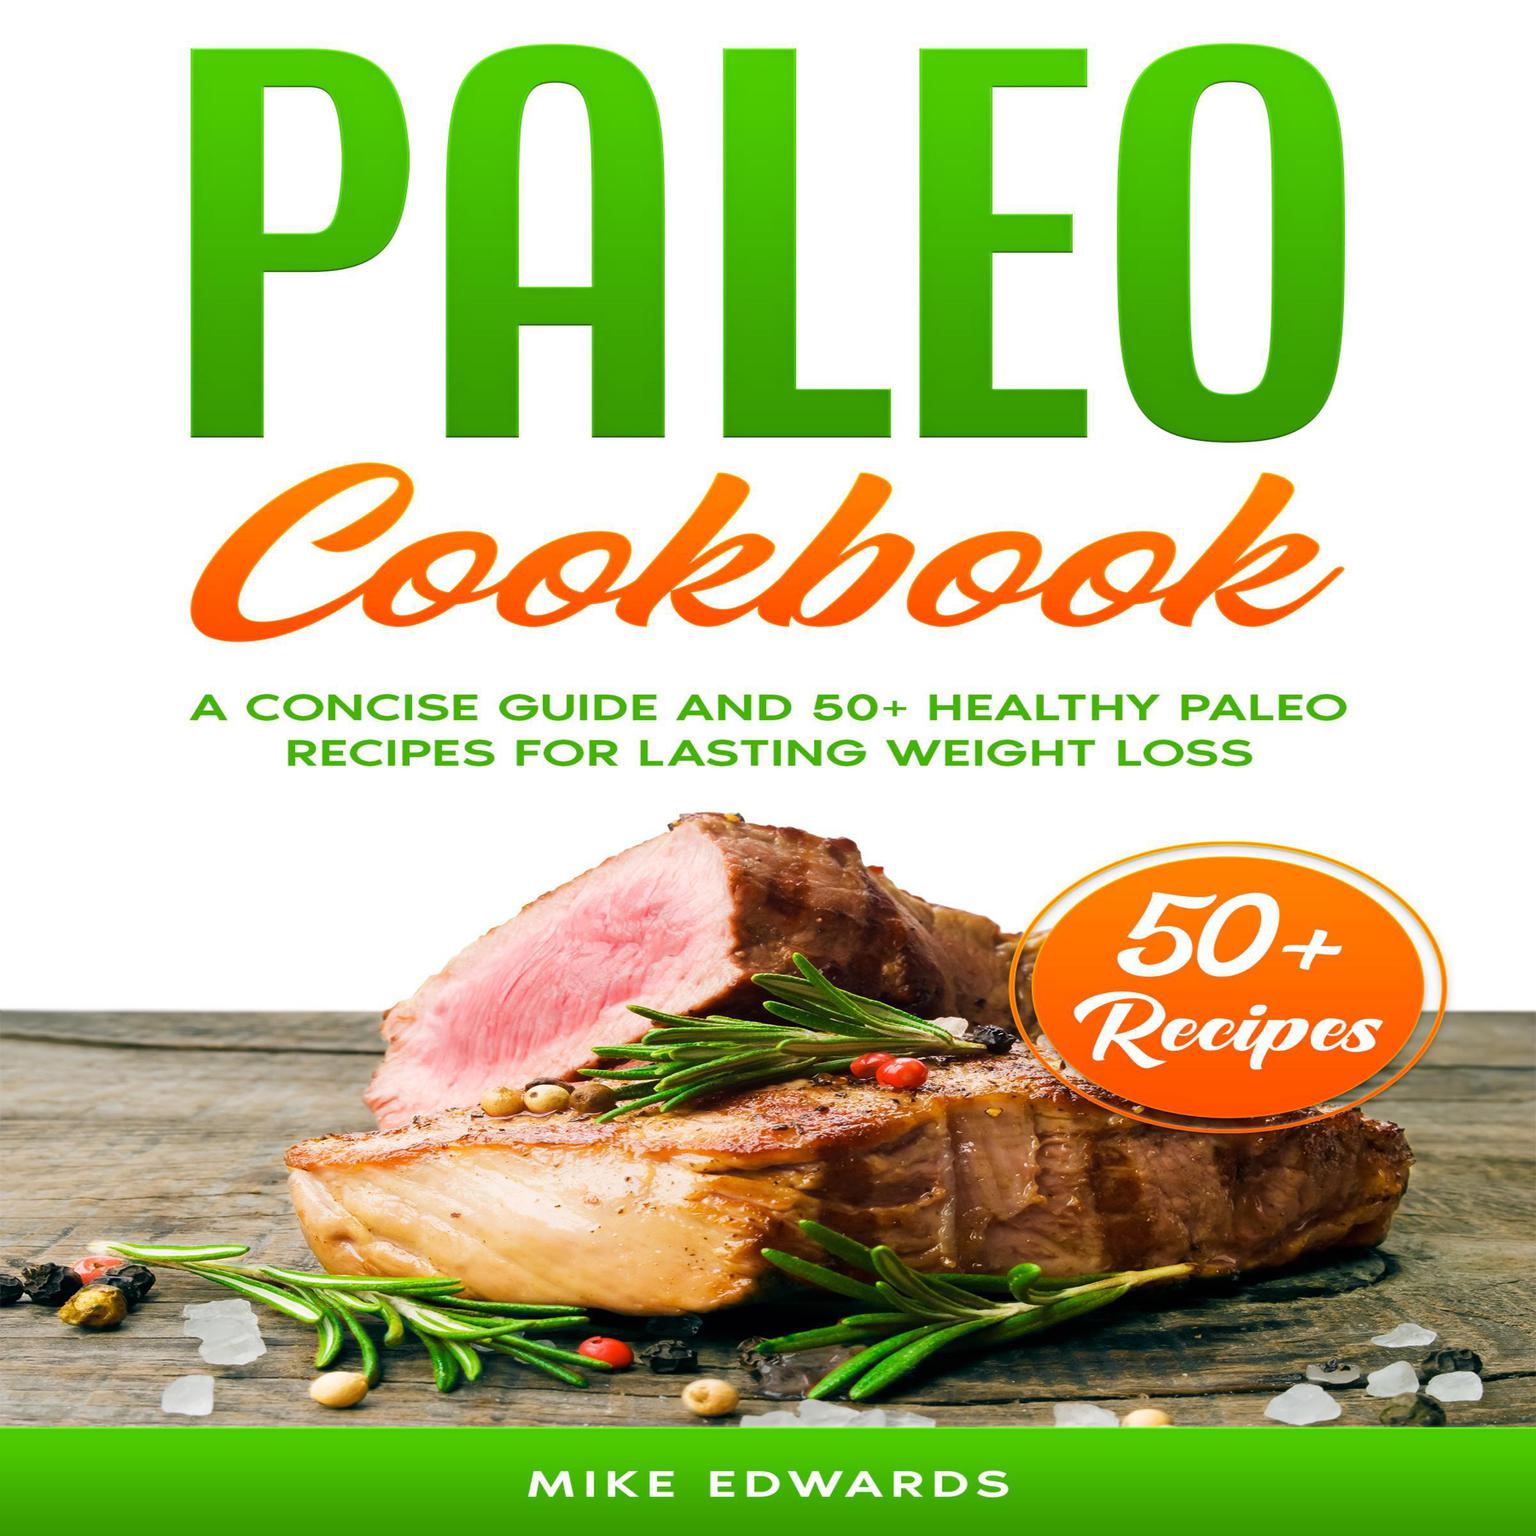 Paleo Cookbook: A Concise Guide and 50+ Healthy Paleo Recipes for Lasting Weight Loss Audiobook, by Mike Edwards